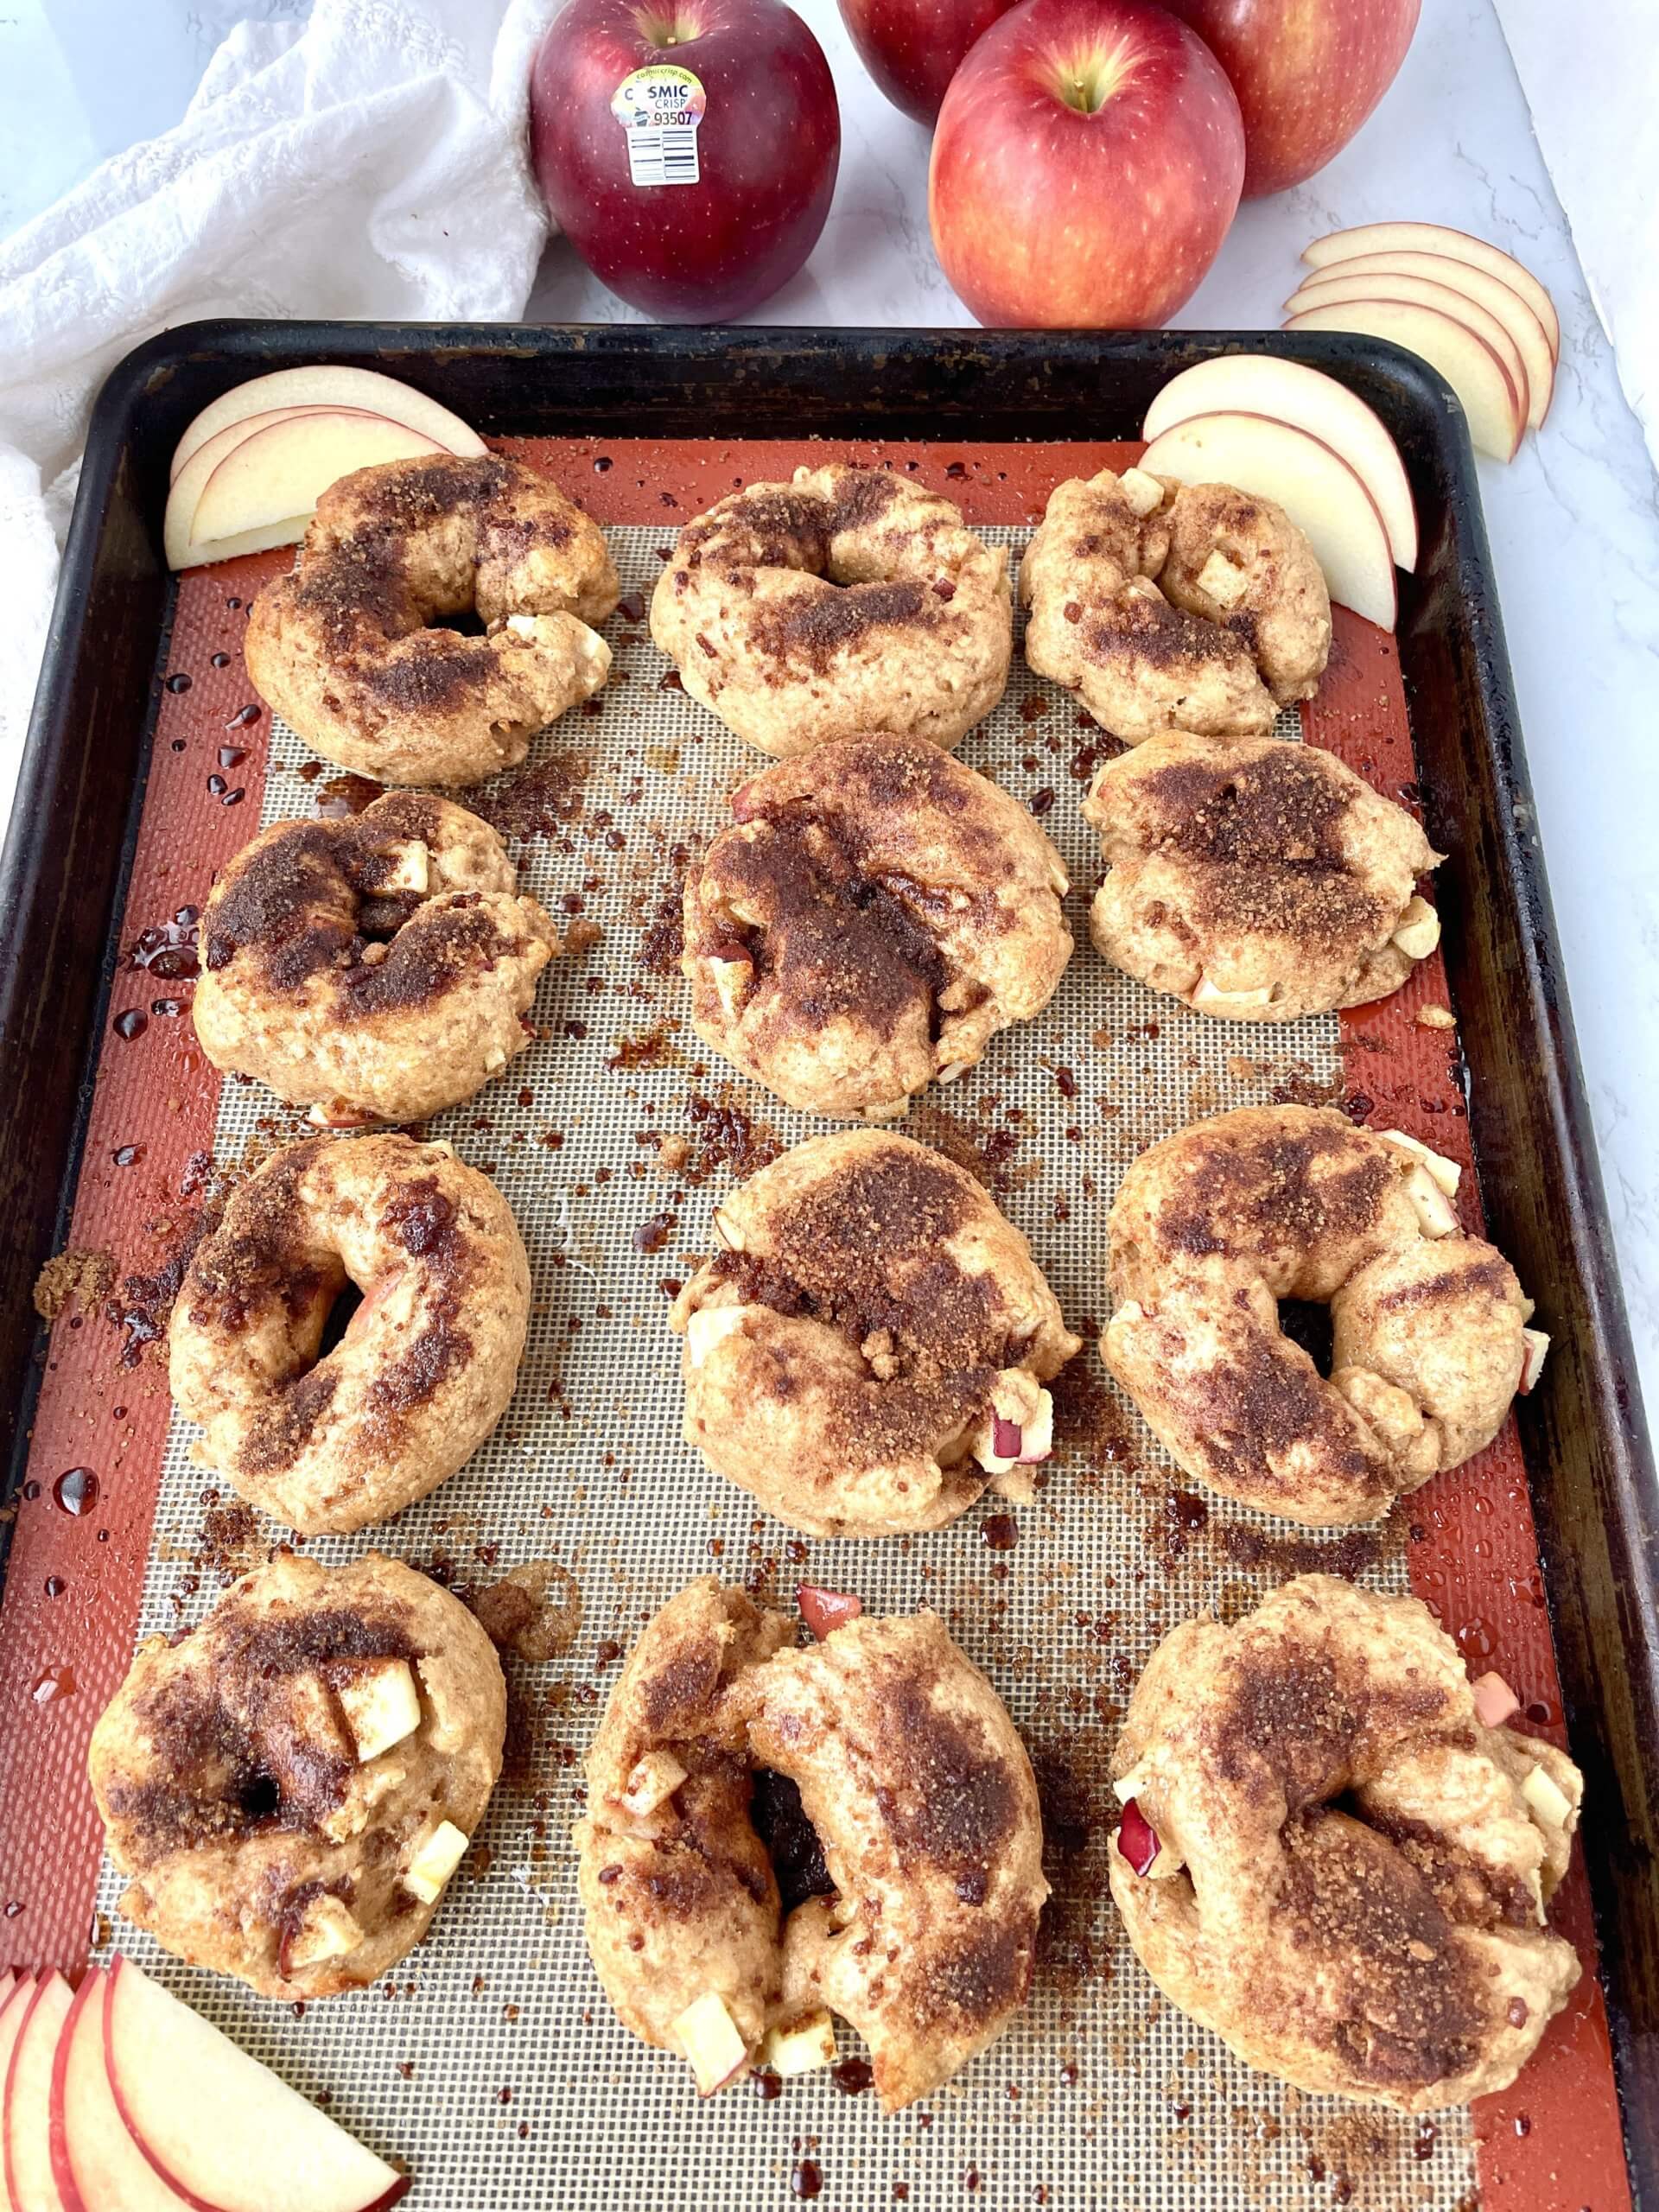 Apple Crunch bagels on a tray ready for baking